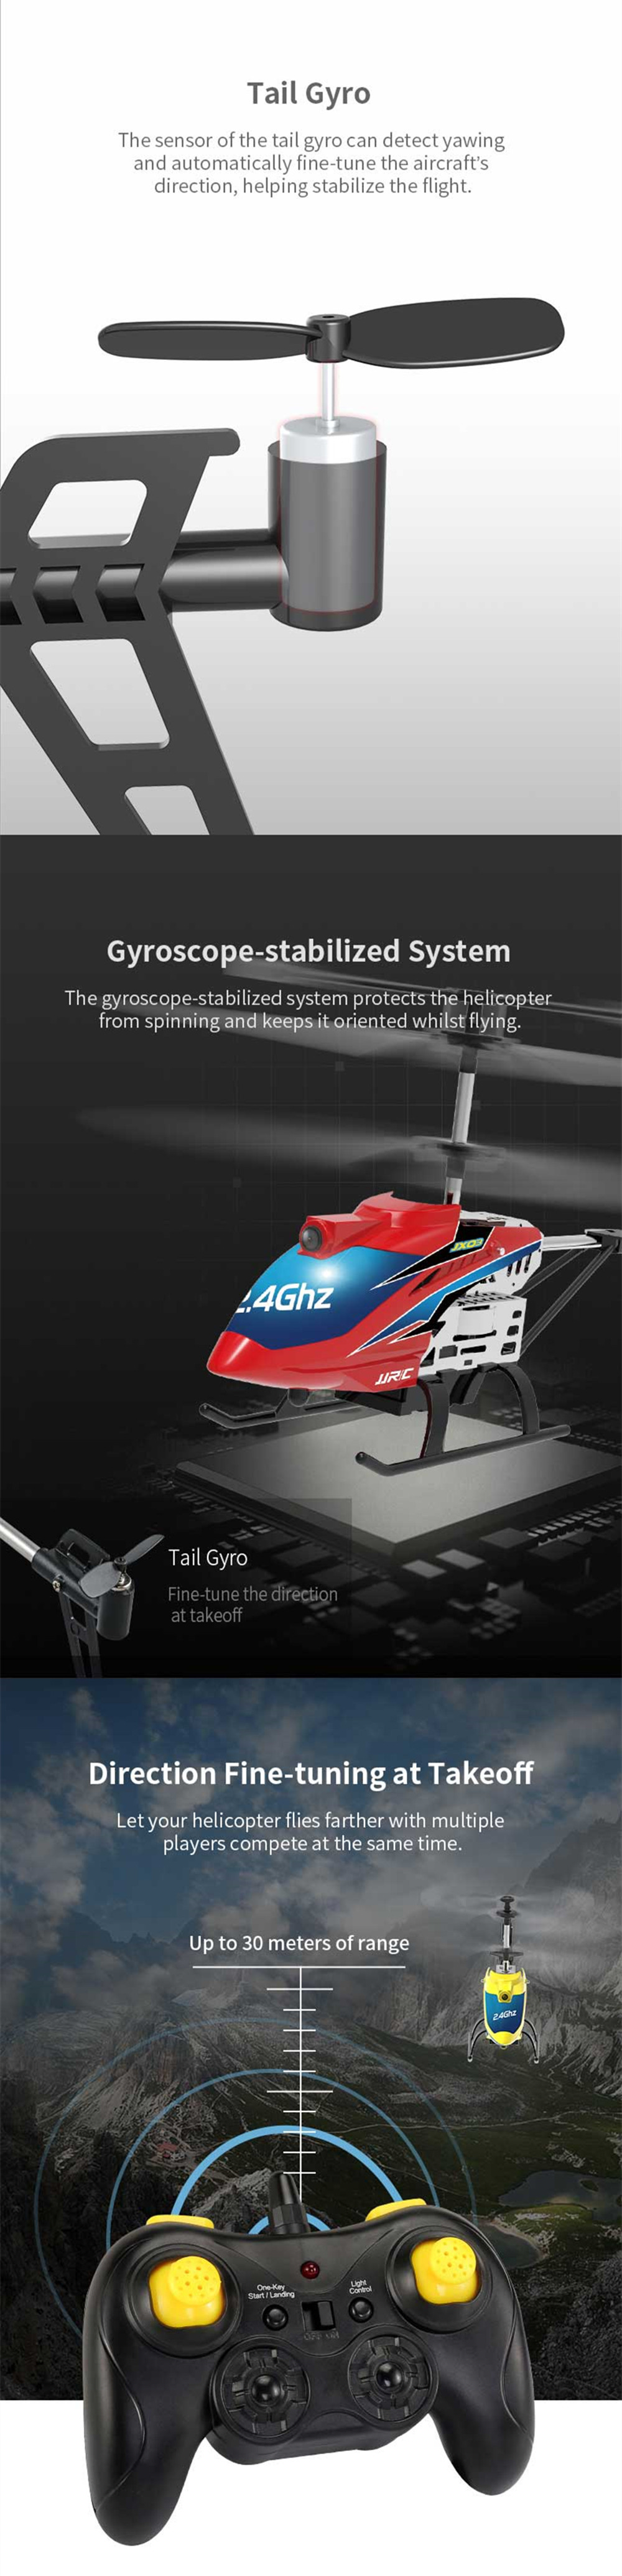 JJRC GAZE JX03 2.4G 4CH Altitude Hold Hover One-key Takeoff RC Helicopter RTF With 720P HD Camera - Photo: 3